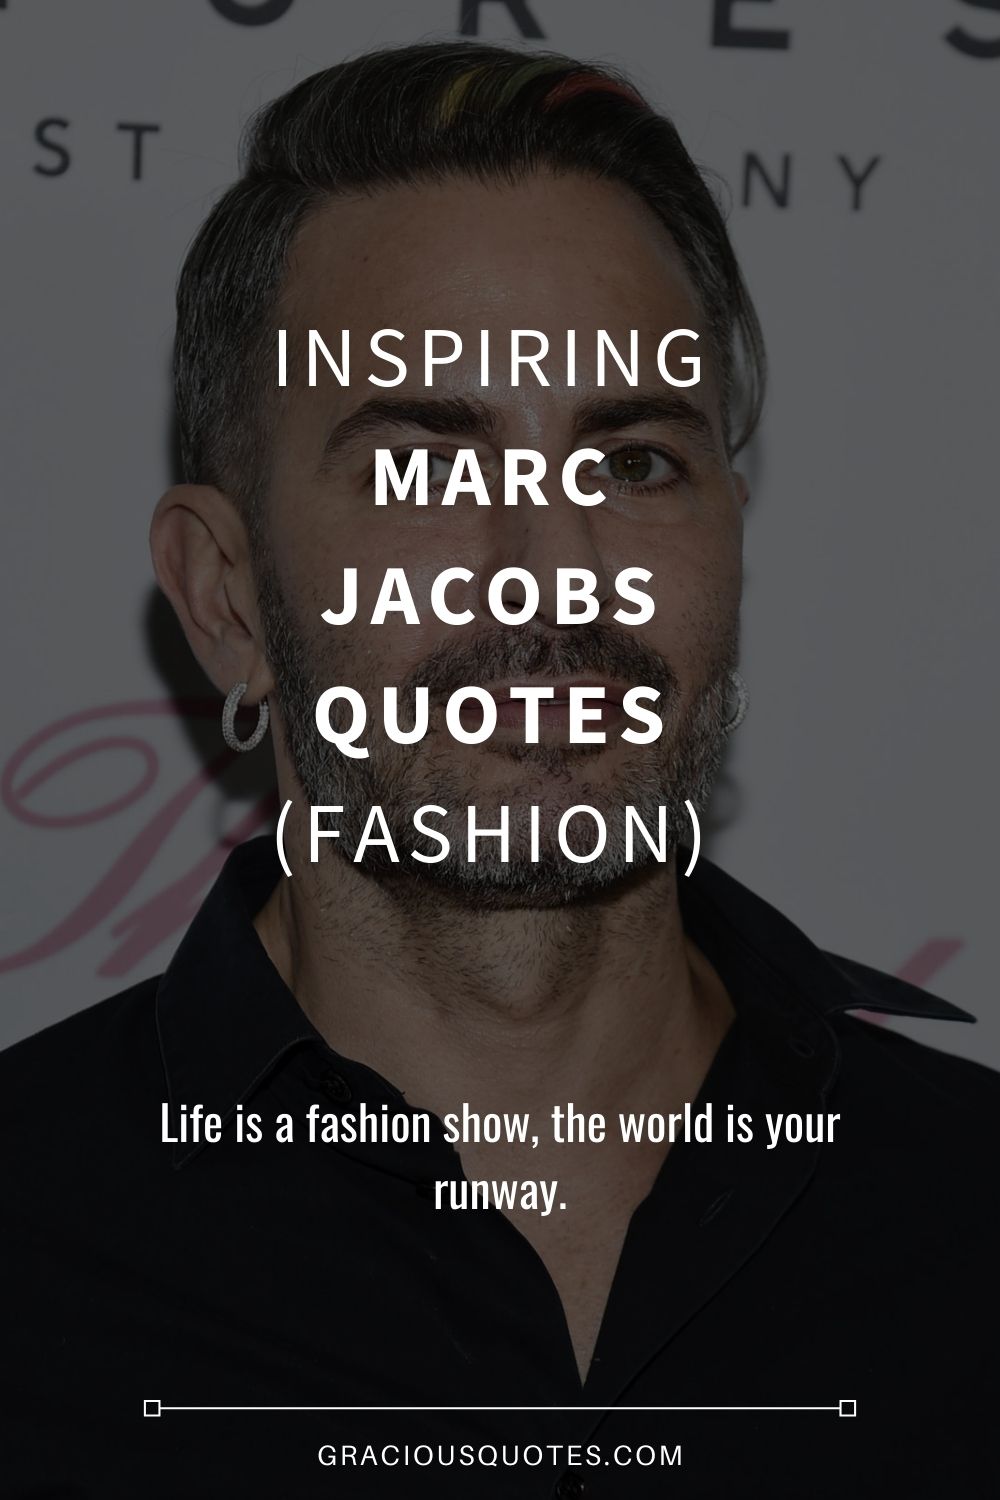 Inspiring Marc Jacobs Quotes (FASHION) - Gracious Quotes